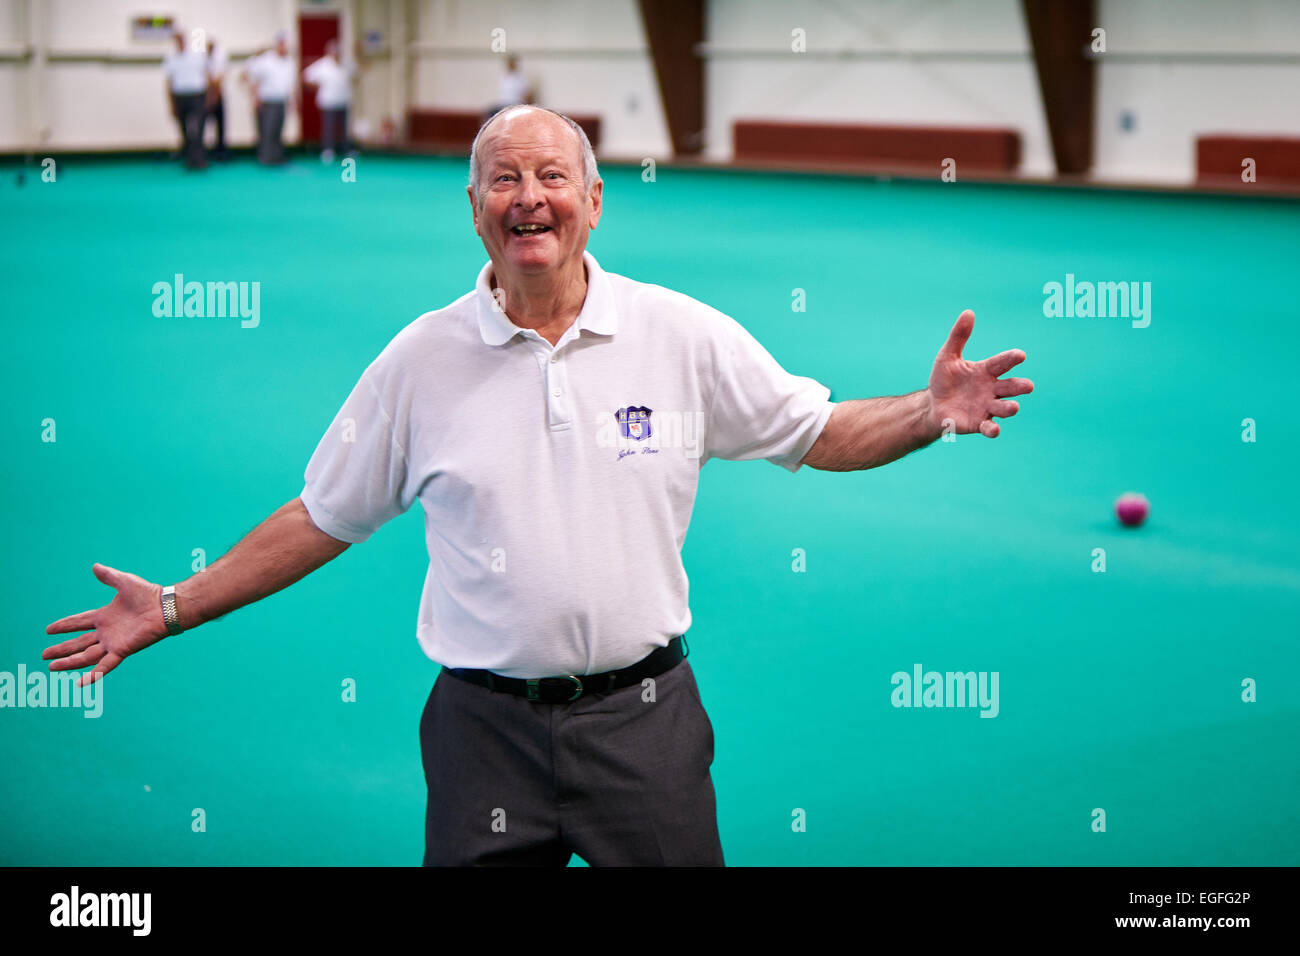 Members of the Oxford & District Indoor Bowls Club playing Stock Photo